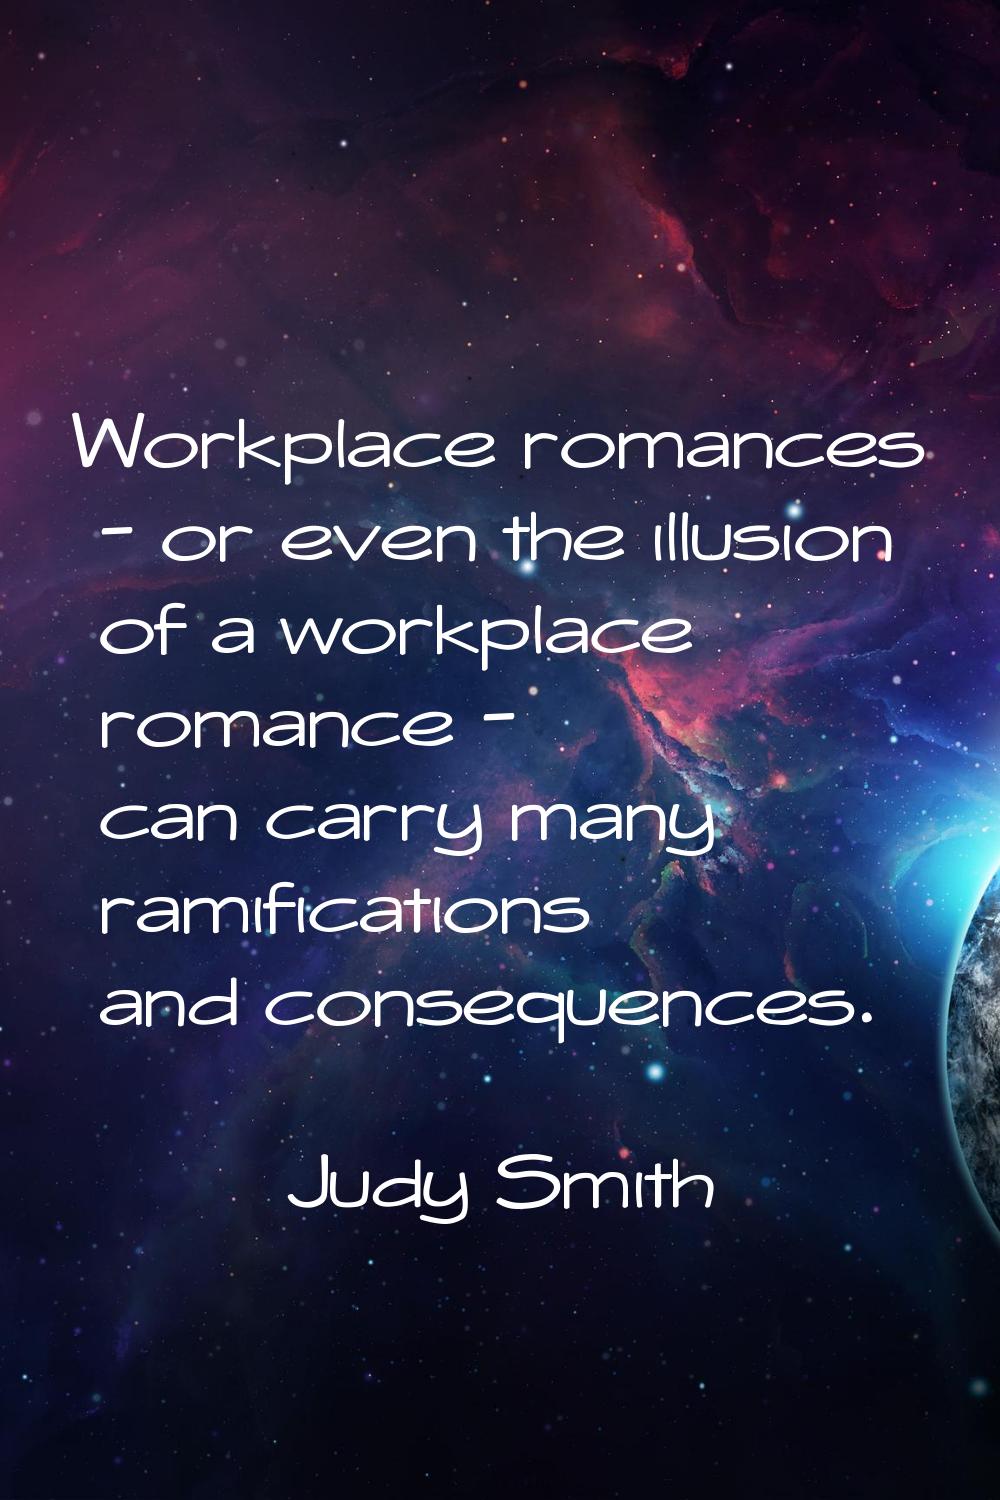 Workplace romances - or even the illusion of a workplace romance - can carry many ramifications and